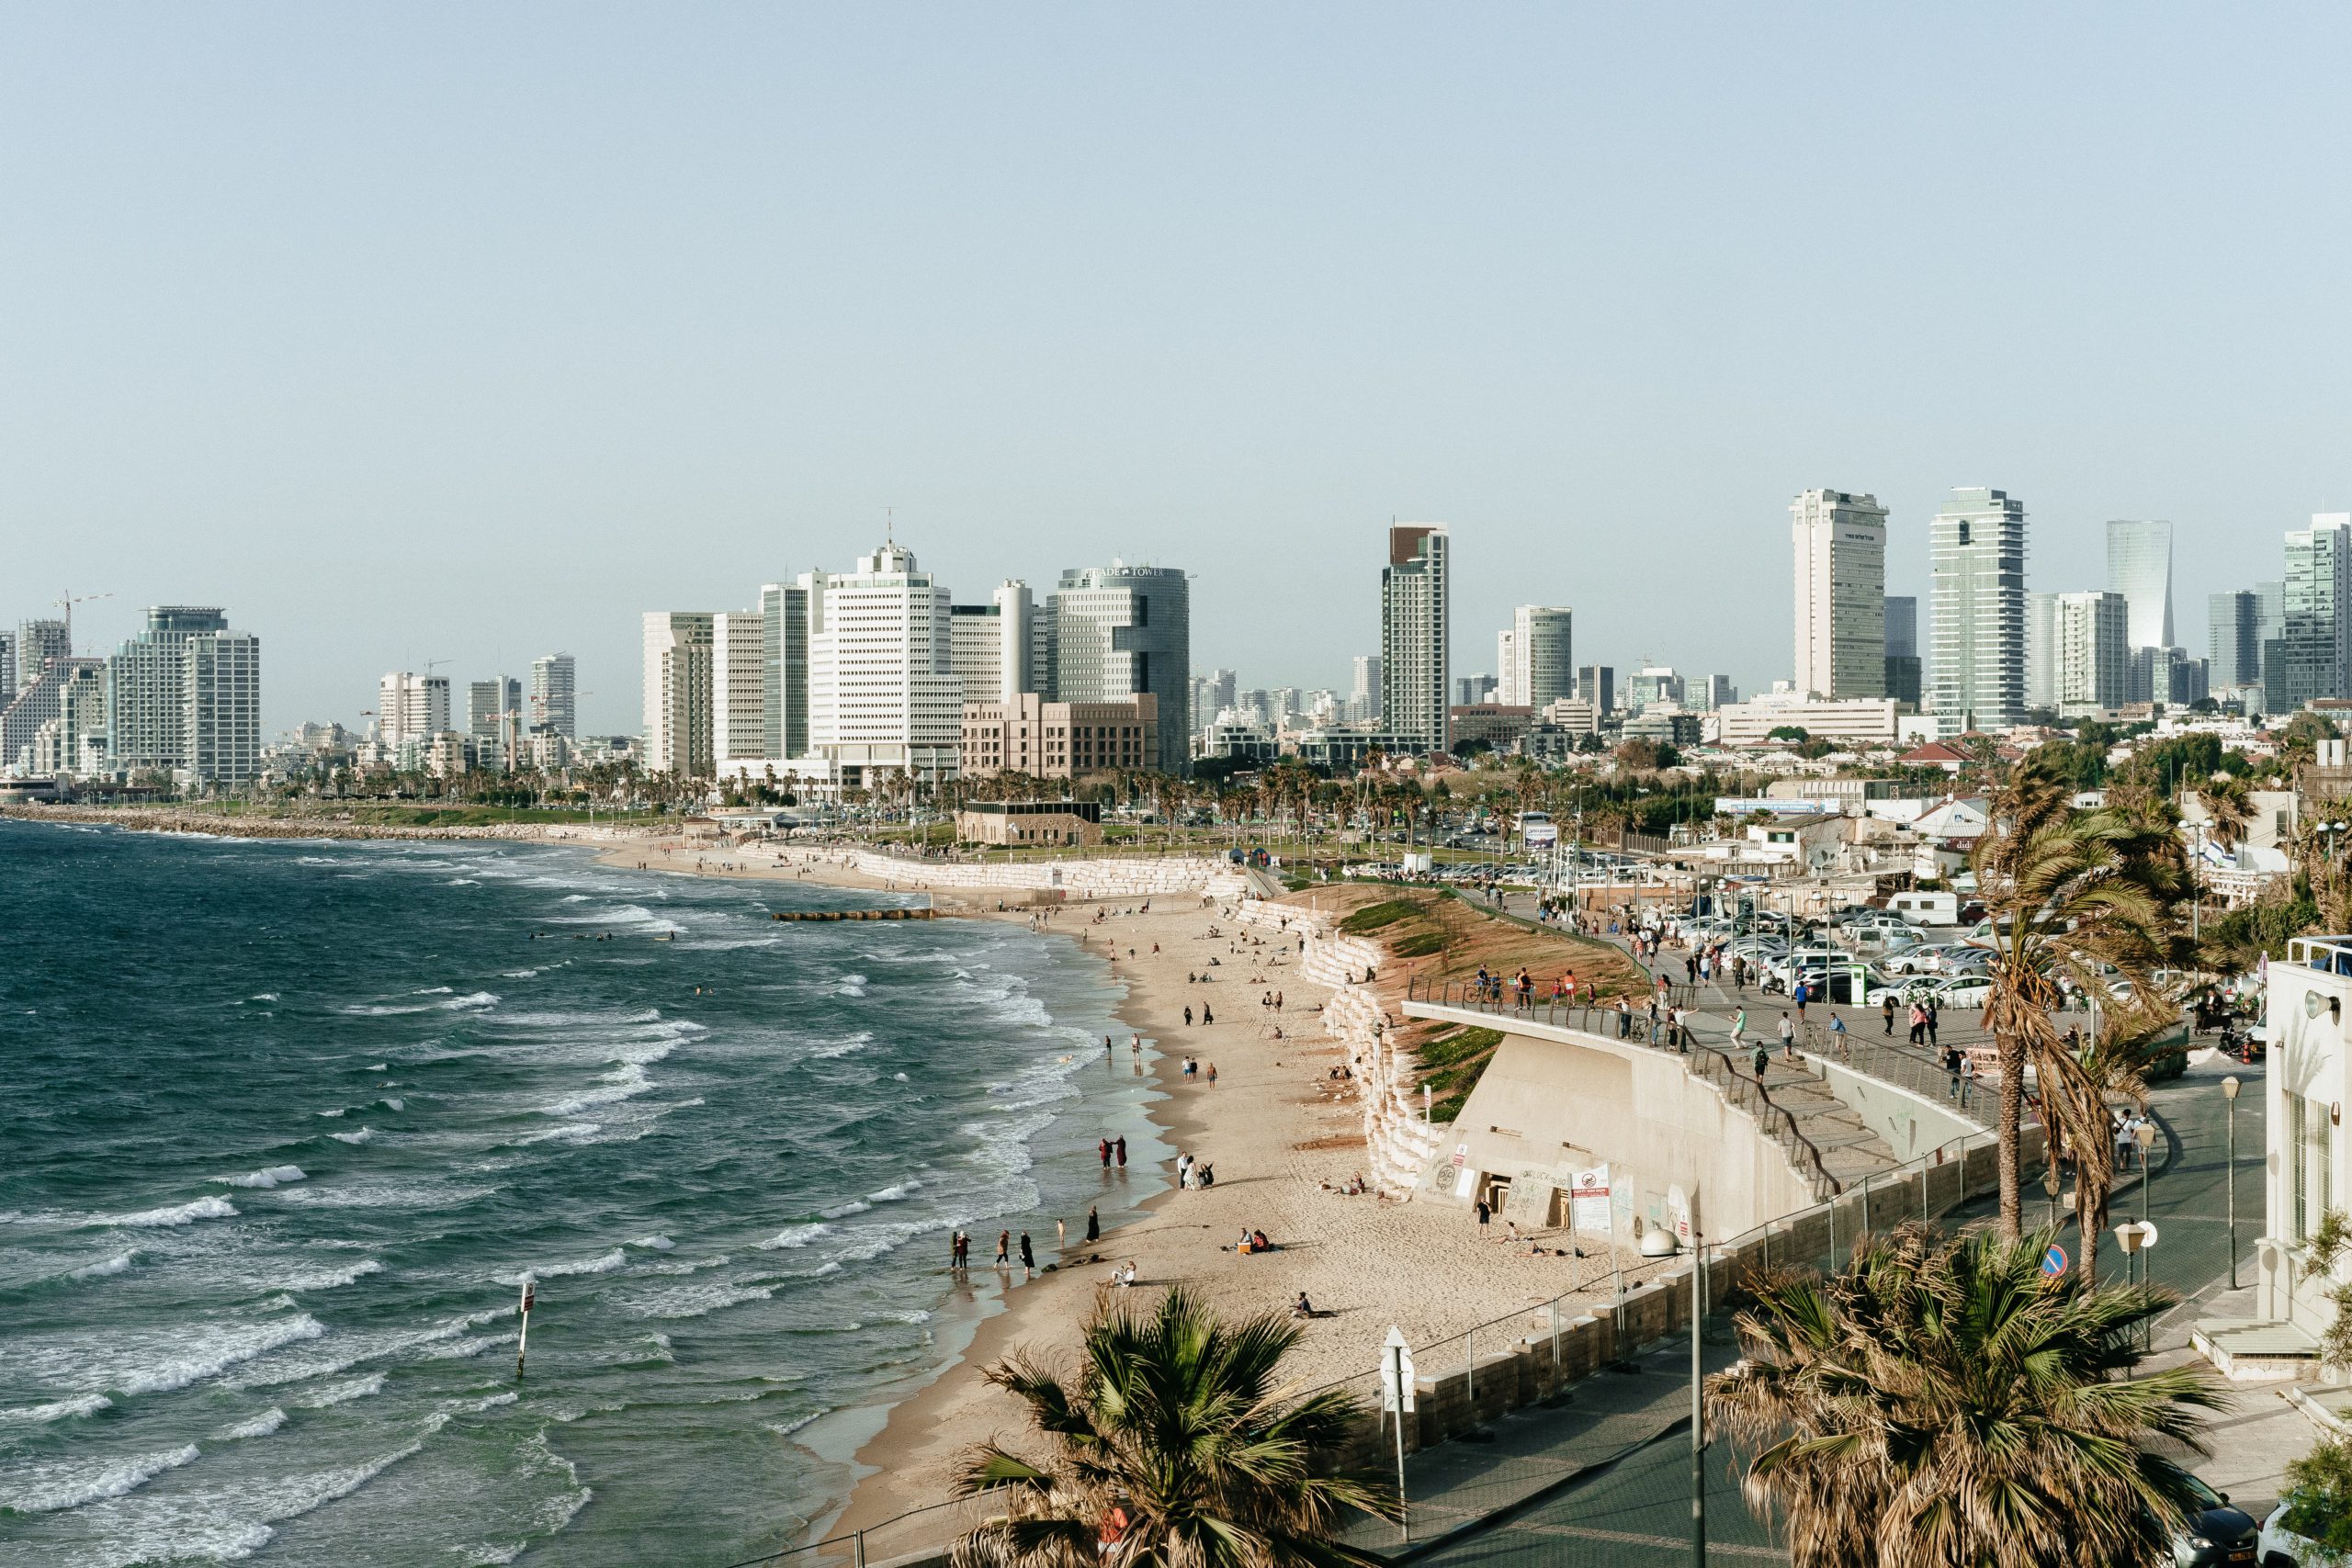 Despite the pandemic, Israeli startups are flourishing with increased funding